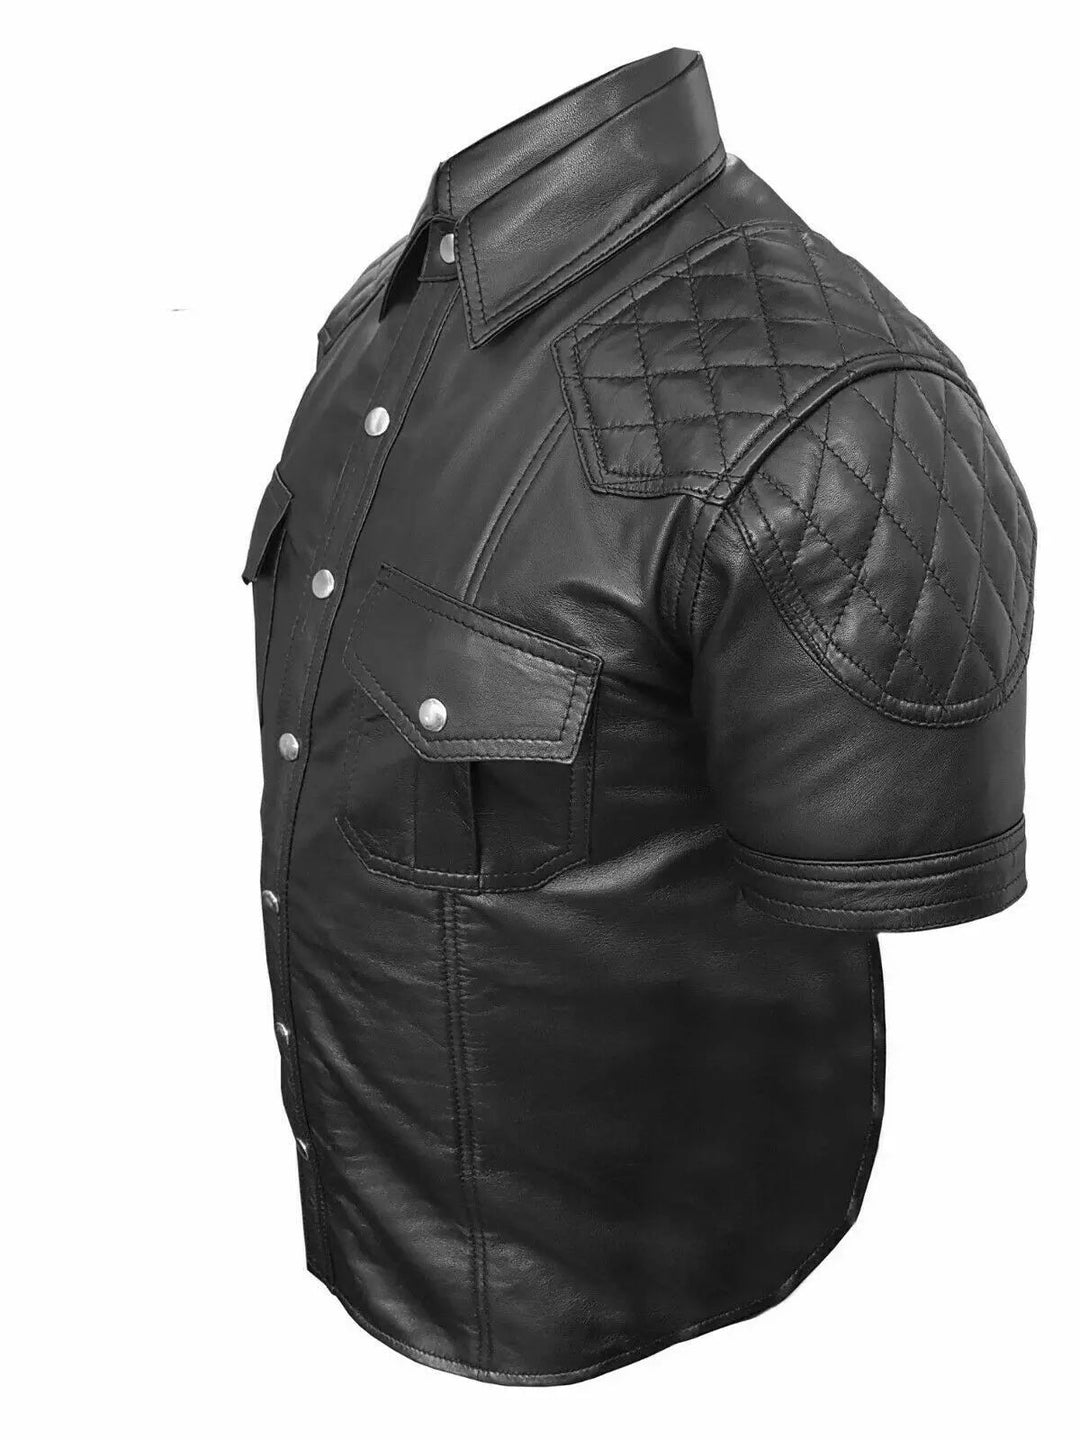 Men's Real Black Leather Police Uniform Style Shirt | All For Me Today